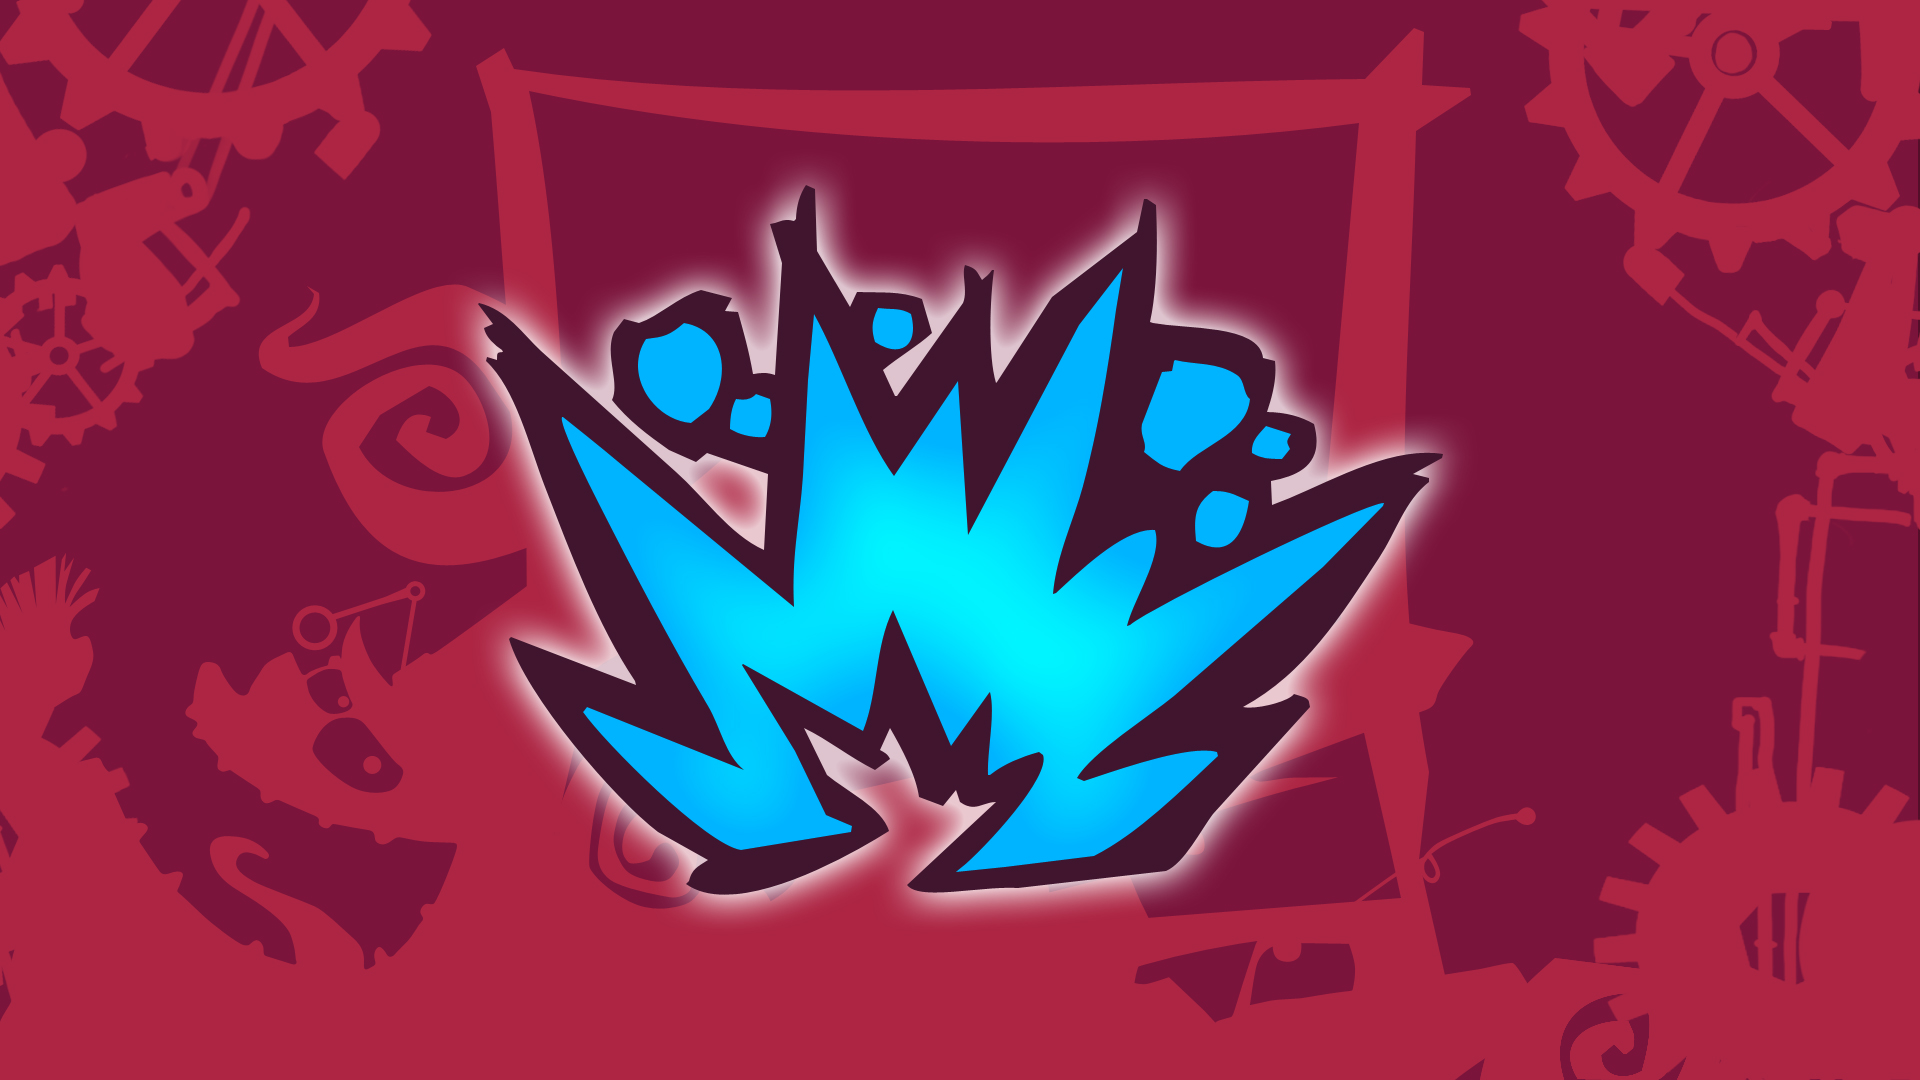 Icon for Splosion Buggy